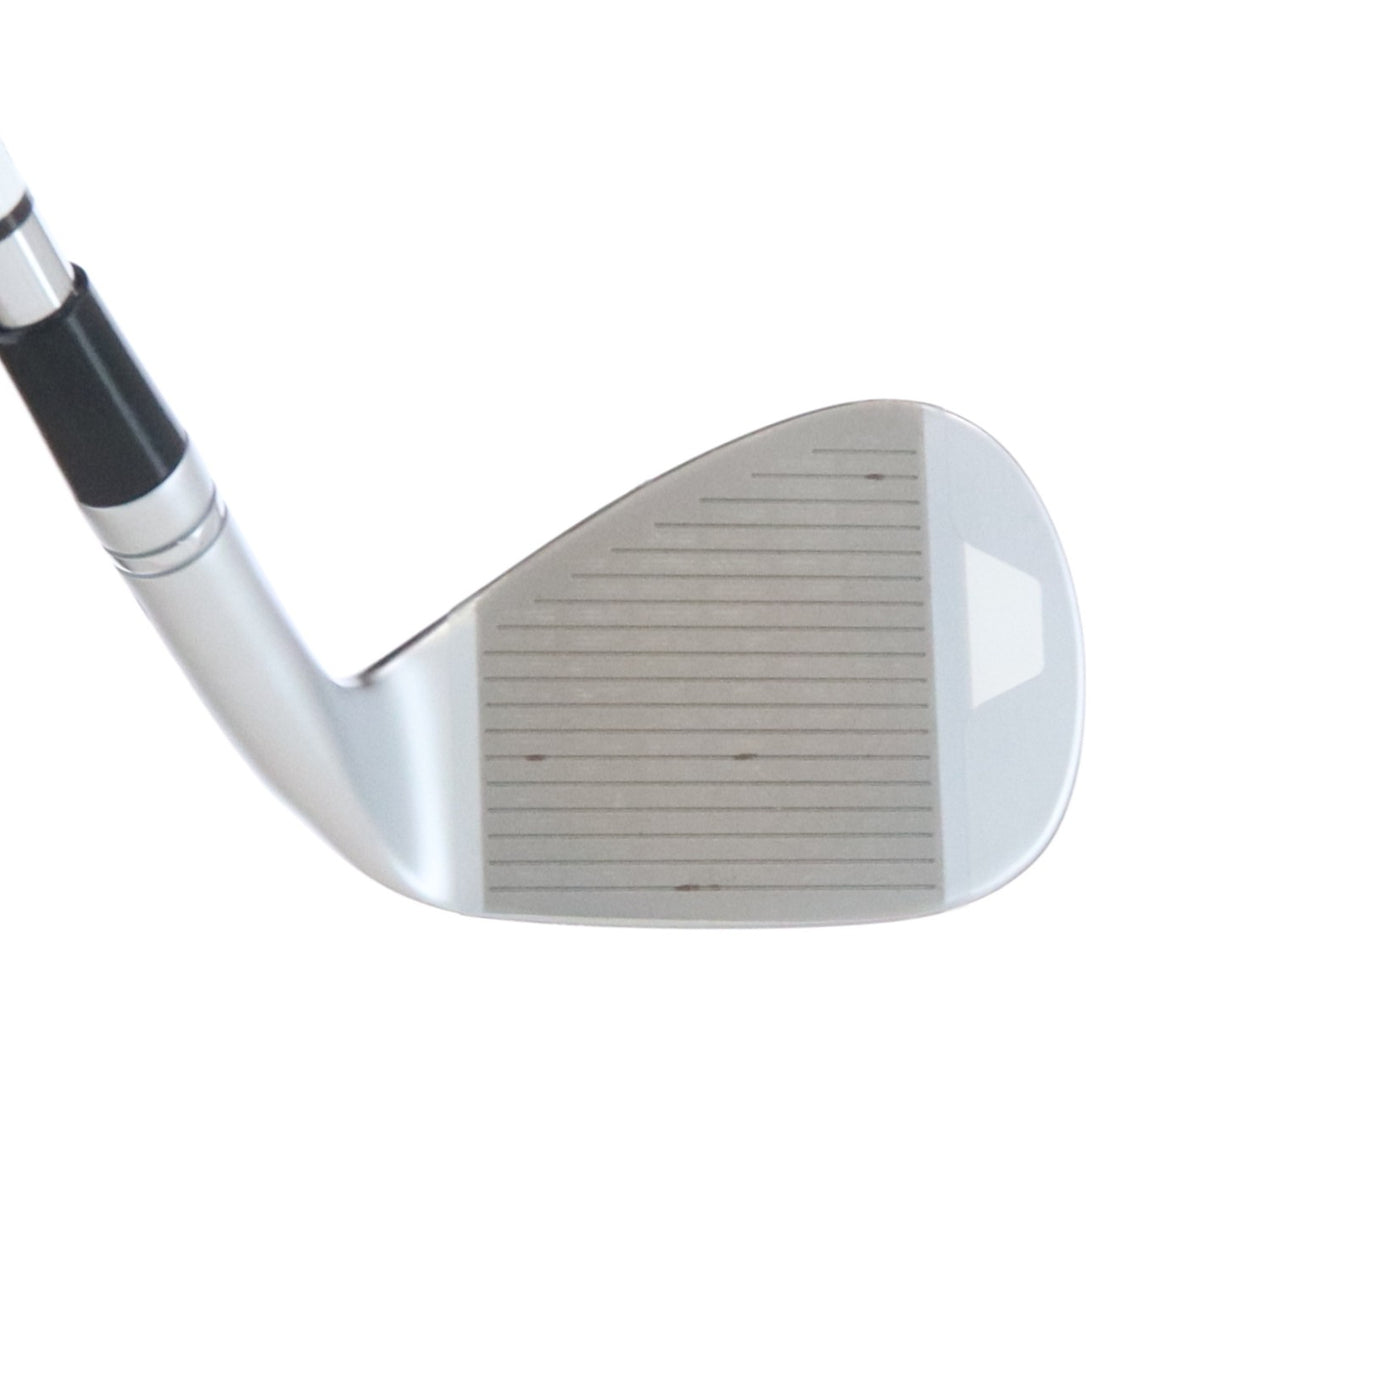 TaylorMade Wedge OpenBox Left-Handed MILLED GRIND 3 52° NS PRO MODUS3 TOUR105